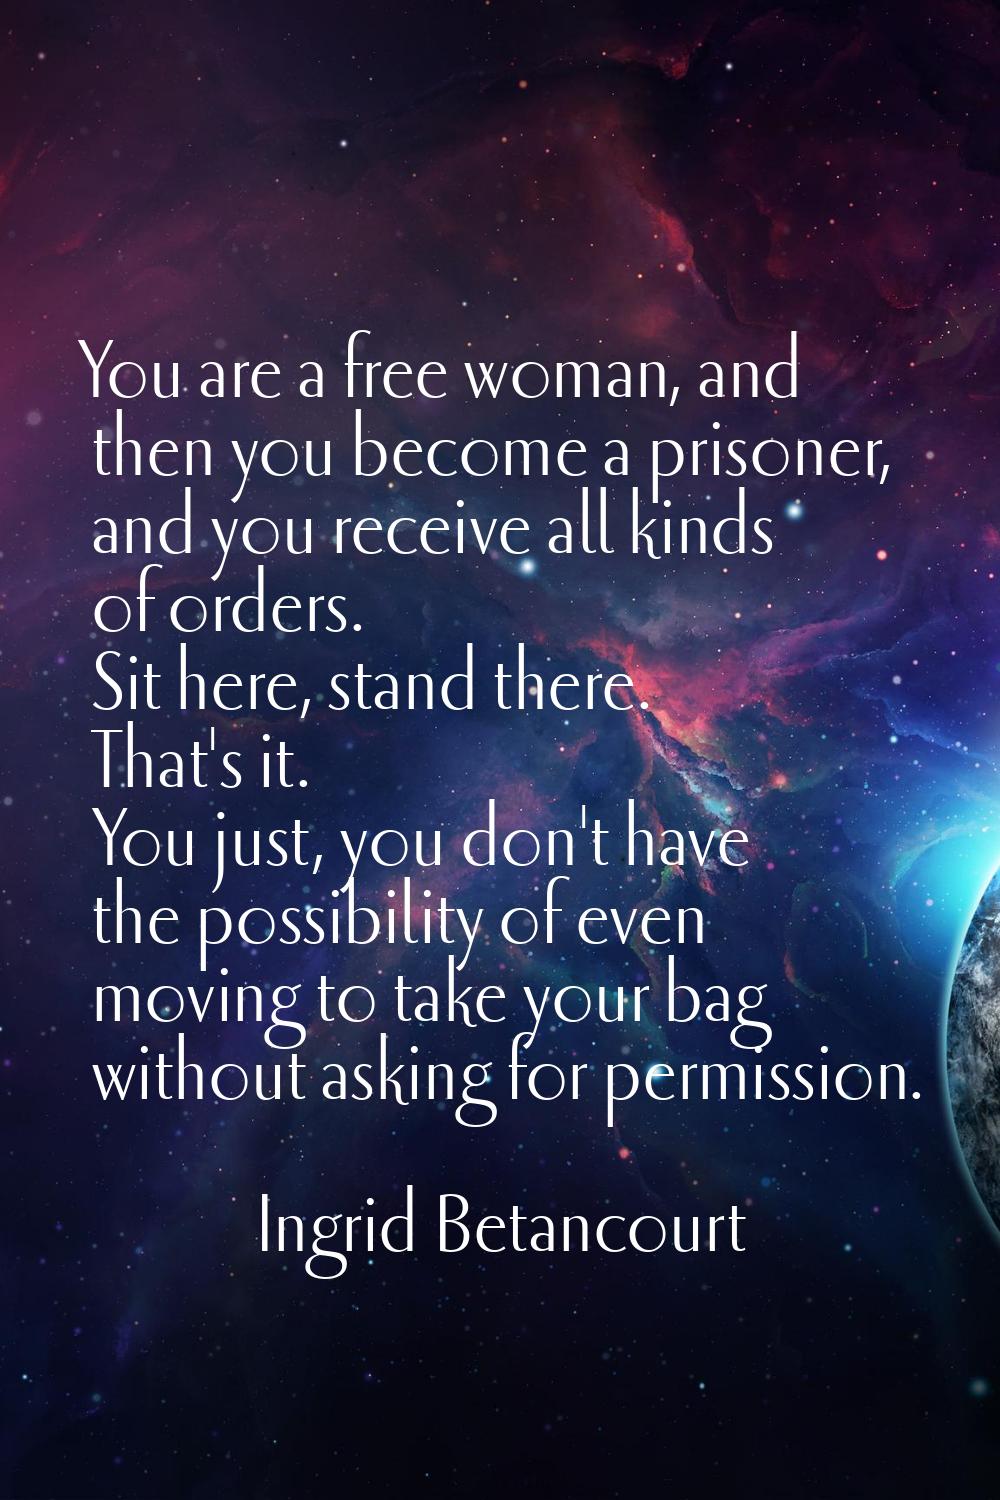 You are a free woman, and then you become a prisoner, and you receive all kinds of orders. Sit here